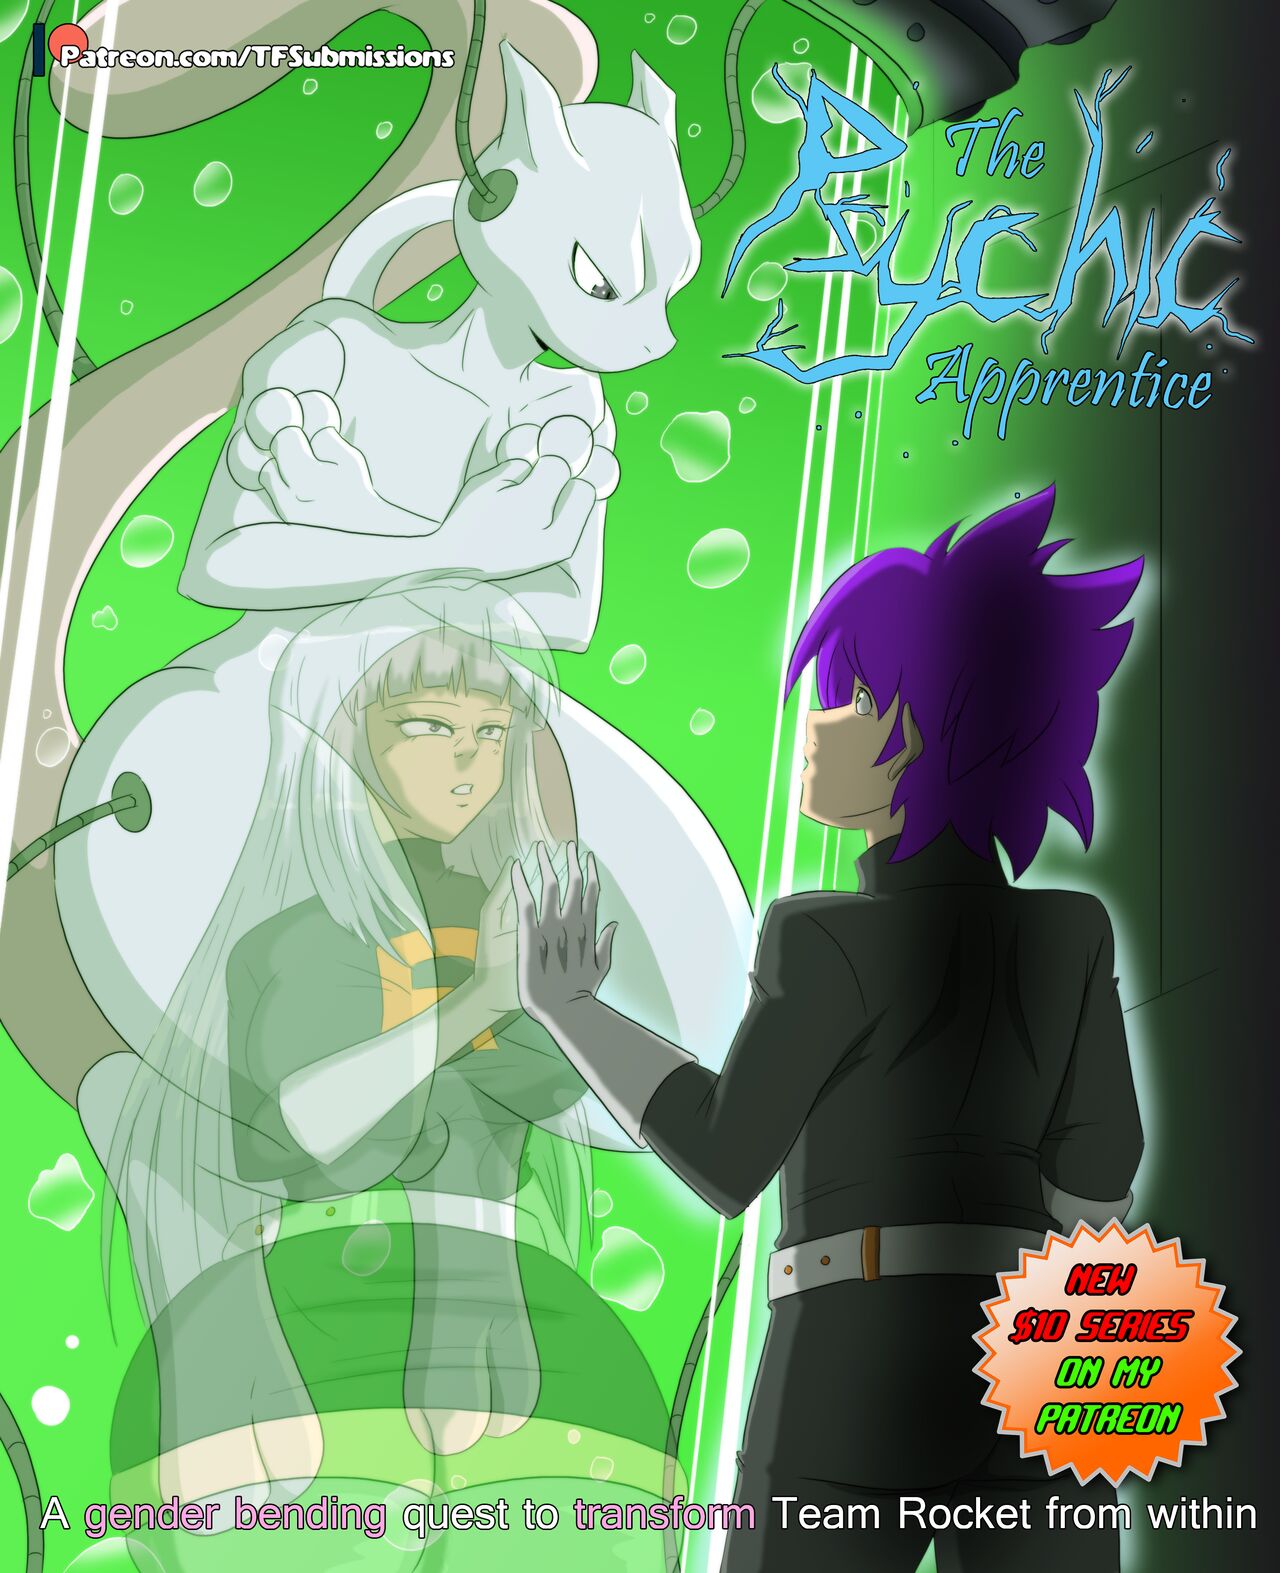 The Psychic Apprentice Tfsubmissions 01